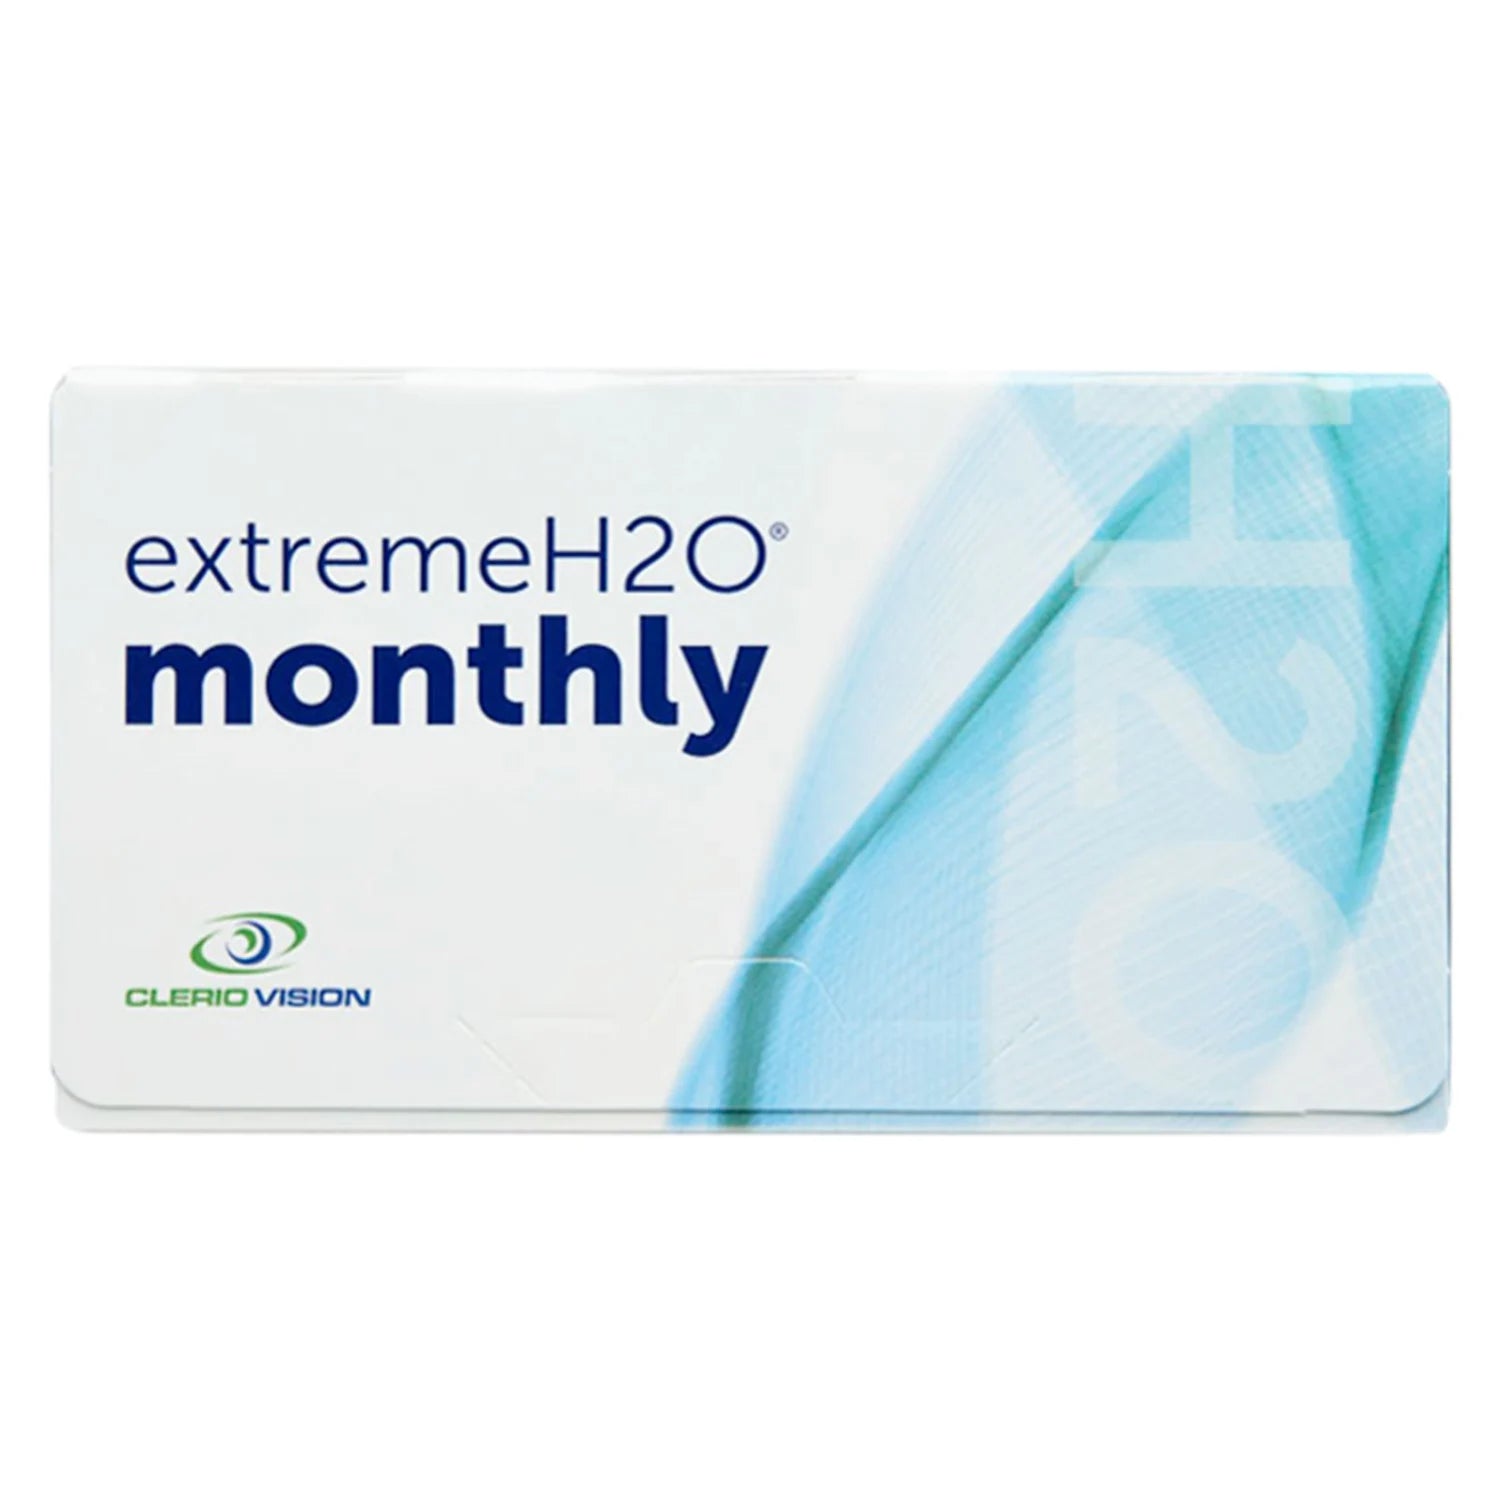 Extreme H20 certified contact lenses